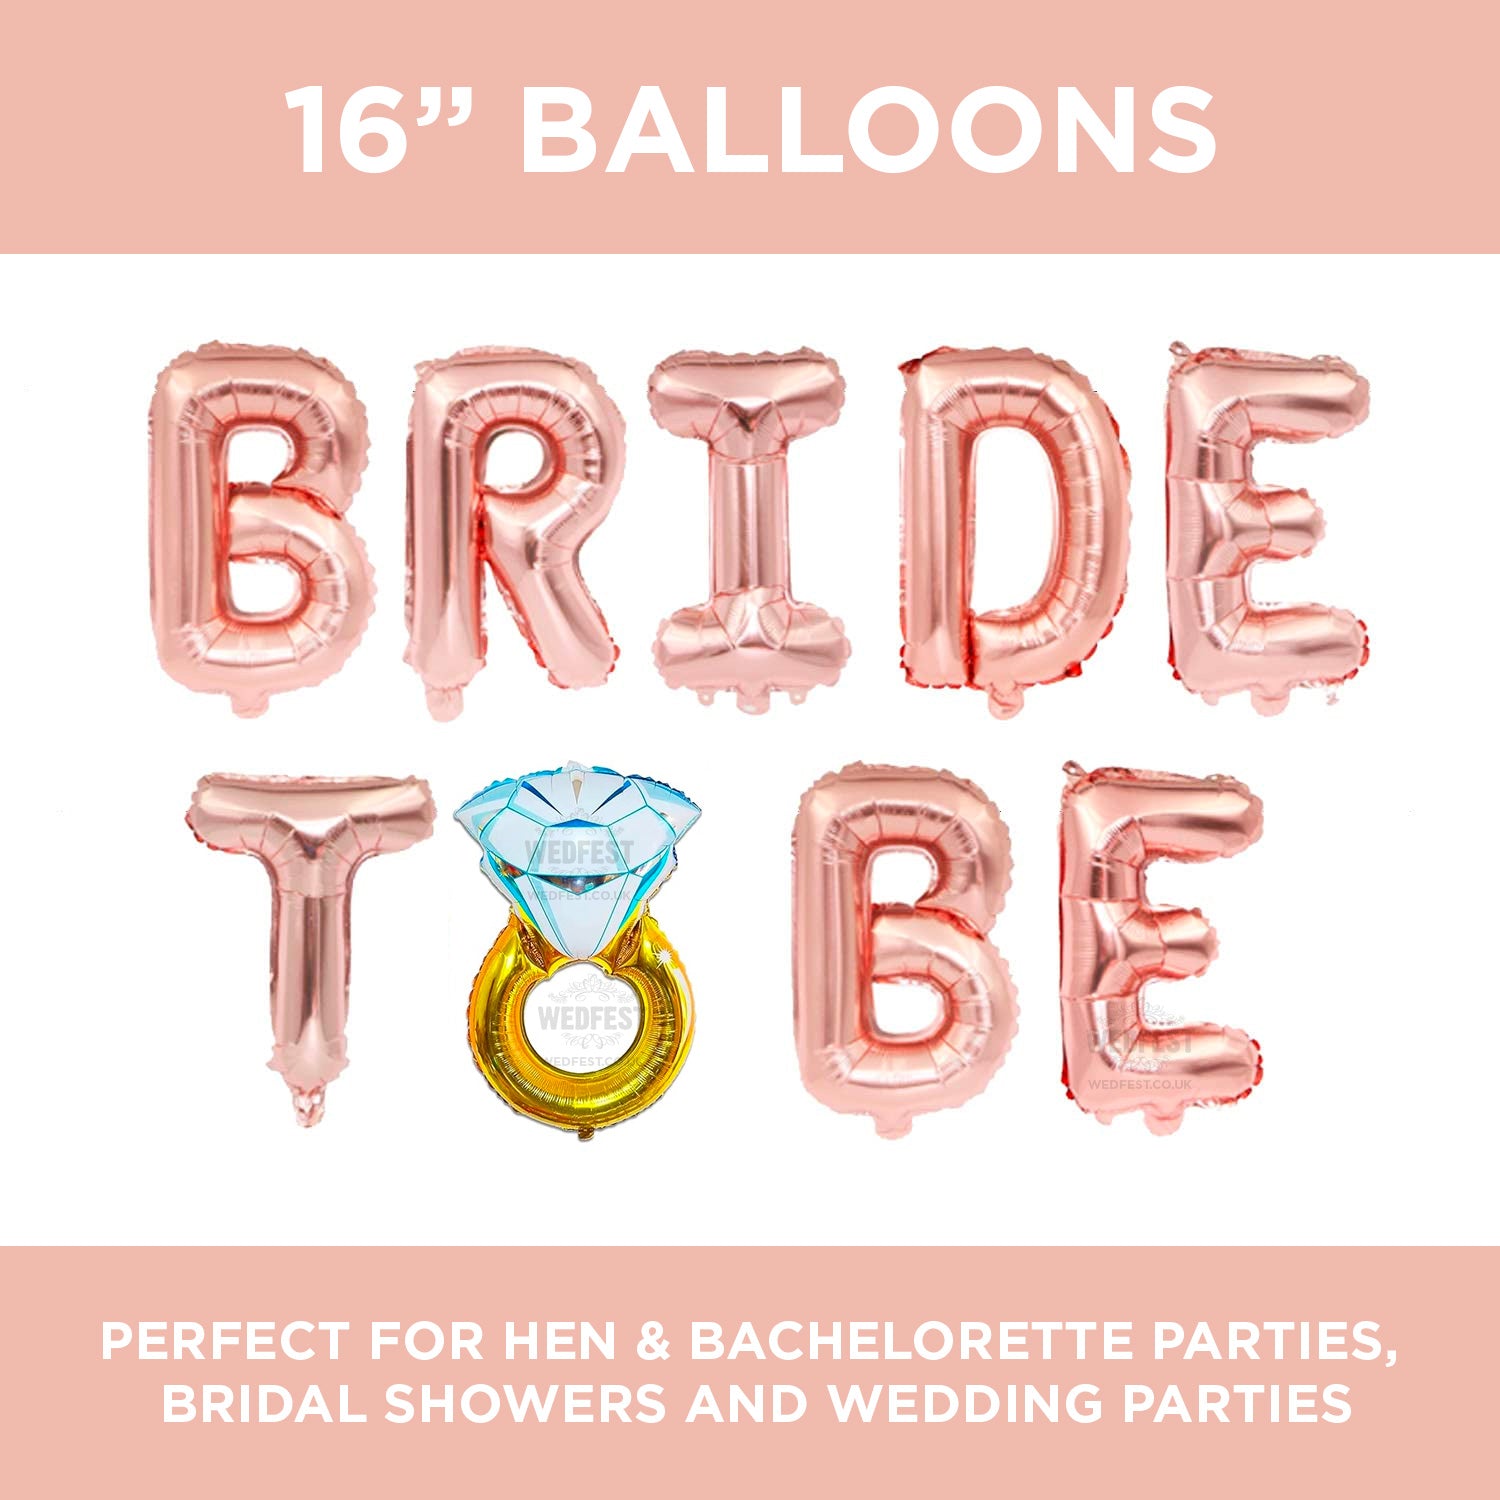 rose gold bride to be diamond ring balloons bridal shower hen party